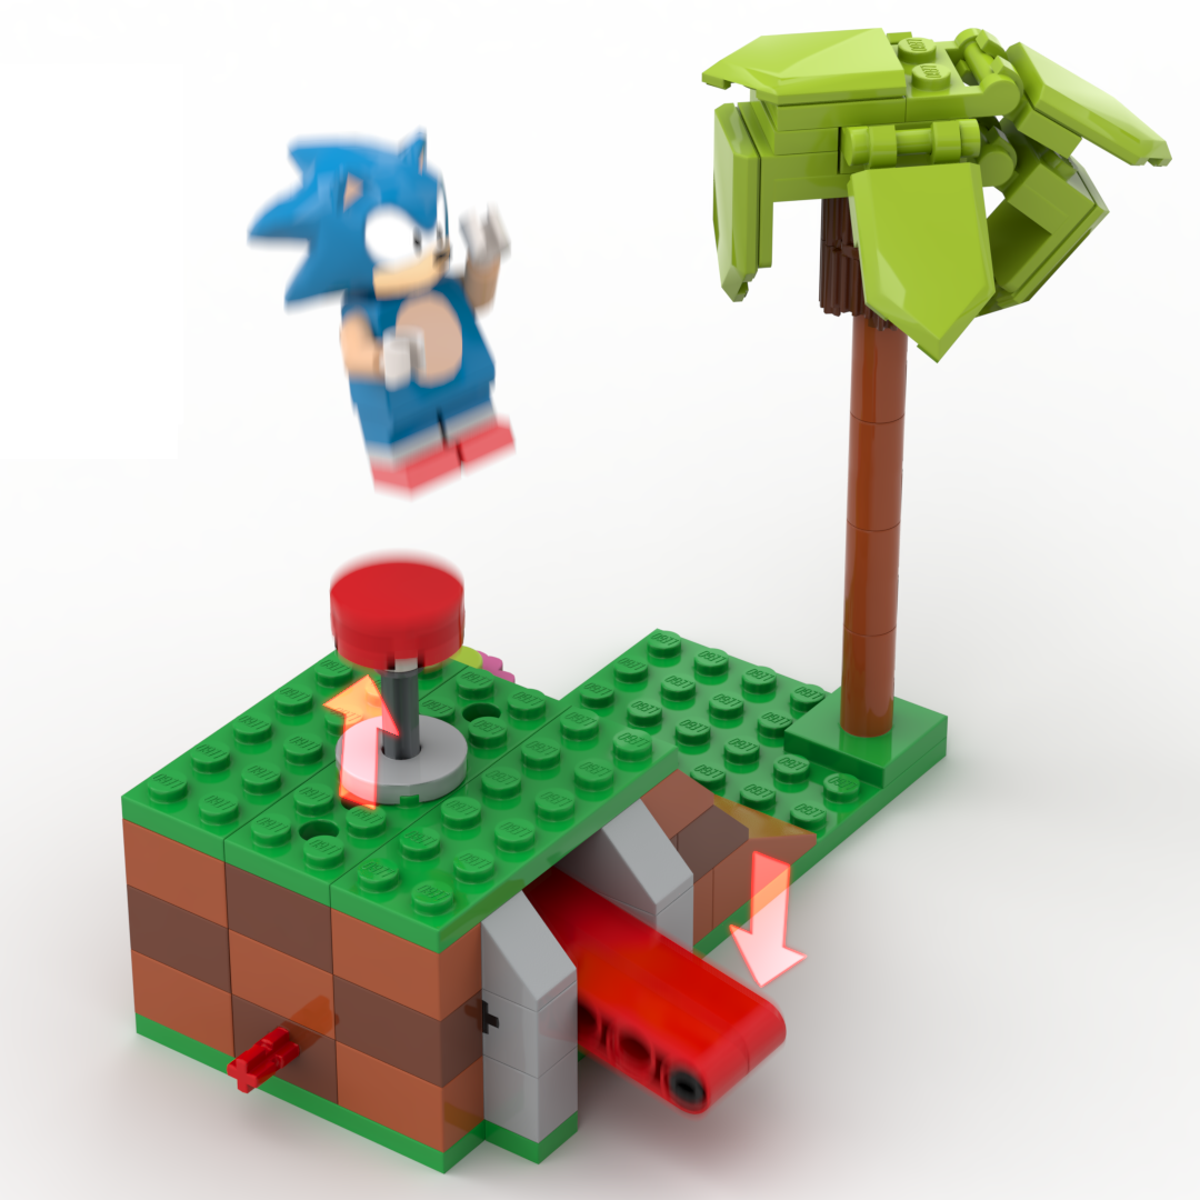 Sonic the Hedgehog is getting an official Lego set